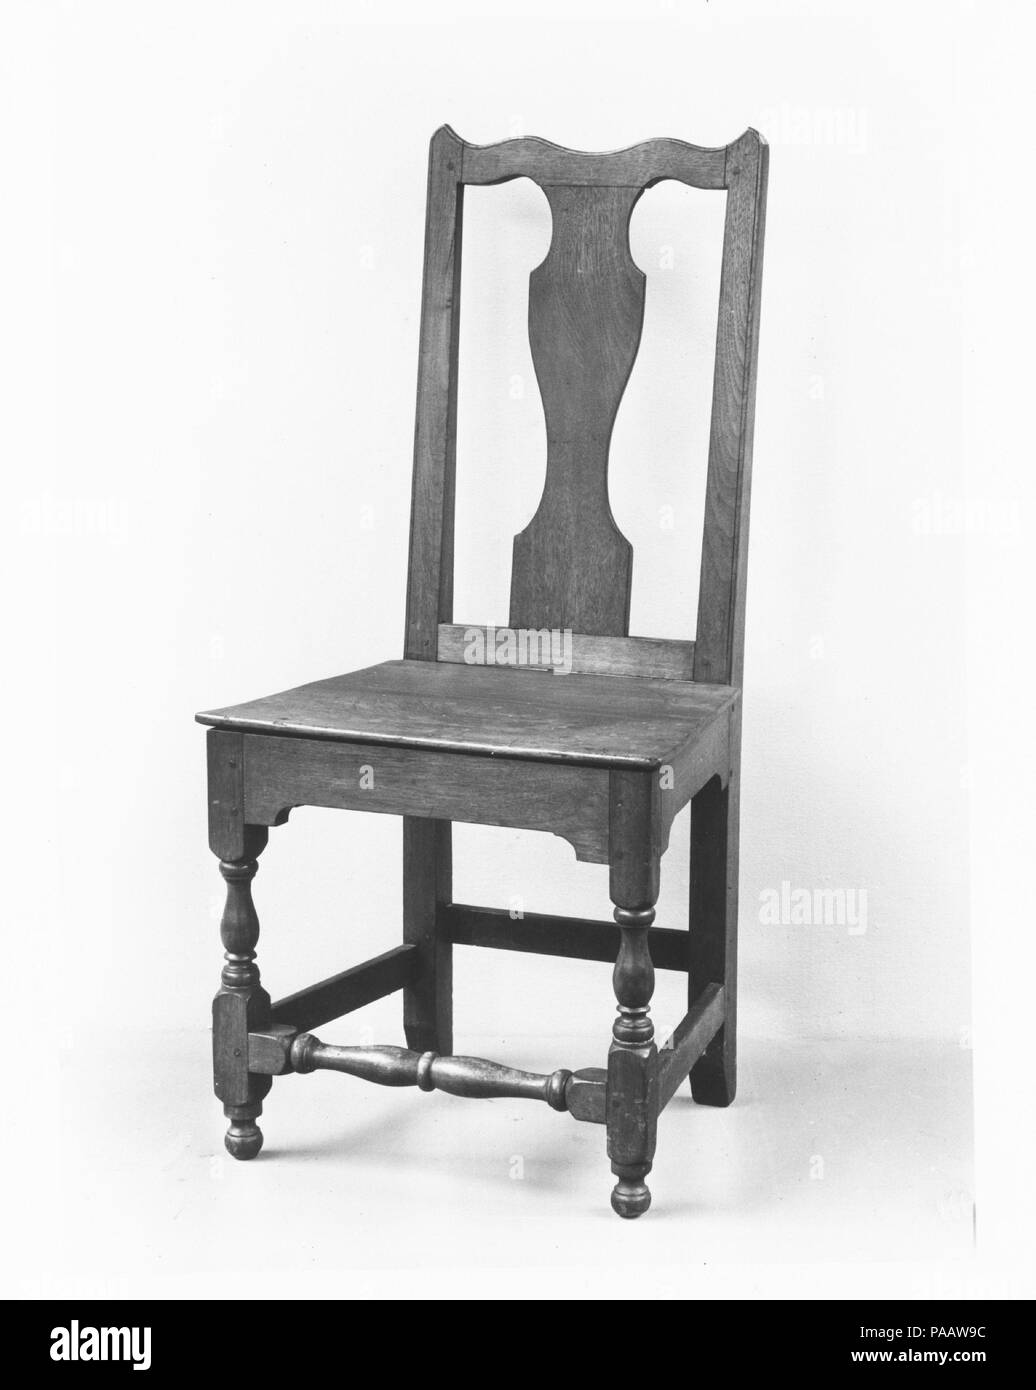 Side Chair. Culture: American. Dimensions: 39 3/4 x 18 1/2 x 15 1/4 in. (101 x 47 x 38.7 cm). Date: 1740-80. Museum: Metropolitan Museum of Art, New York, USA. Stock Photo